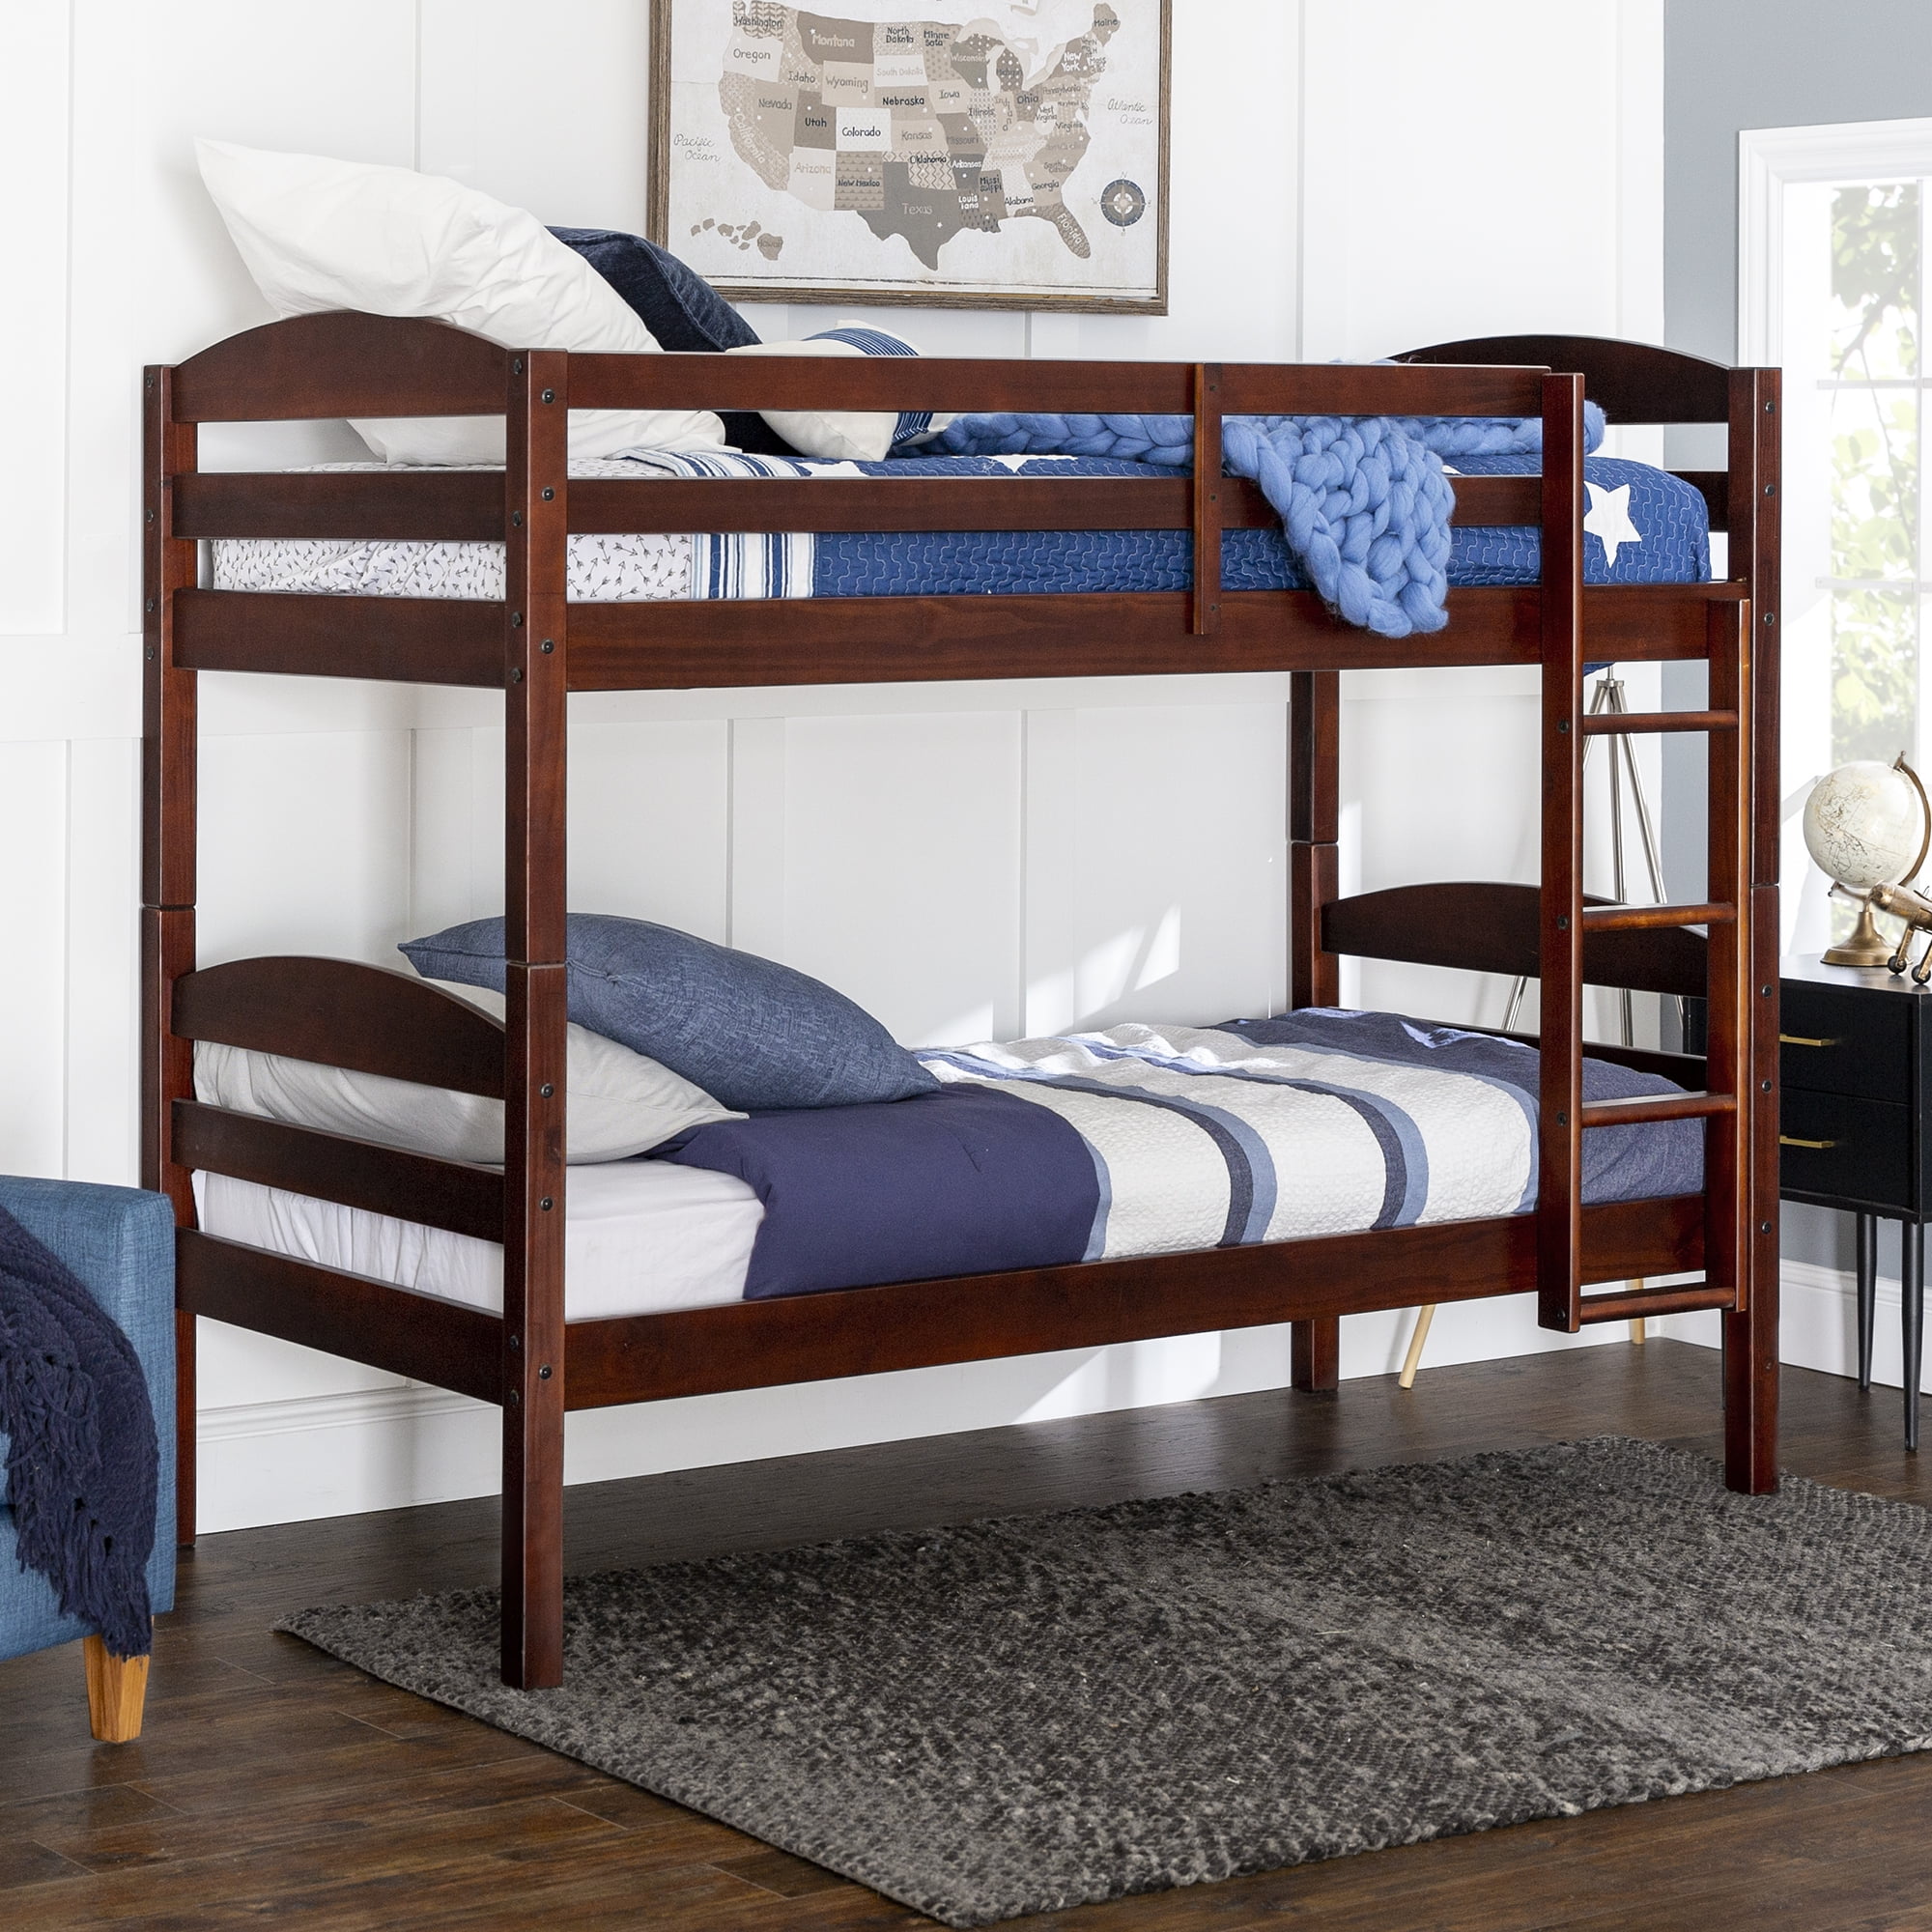 Walker Edison Solid Wood Twin Over, Bunk Beds That Separate Into Twin Beds